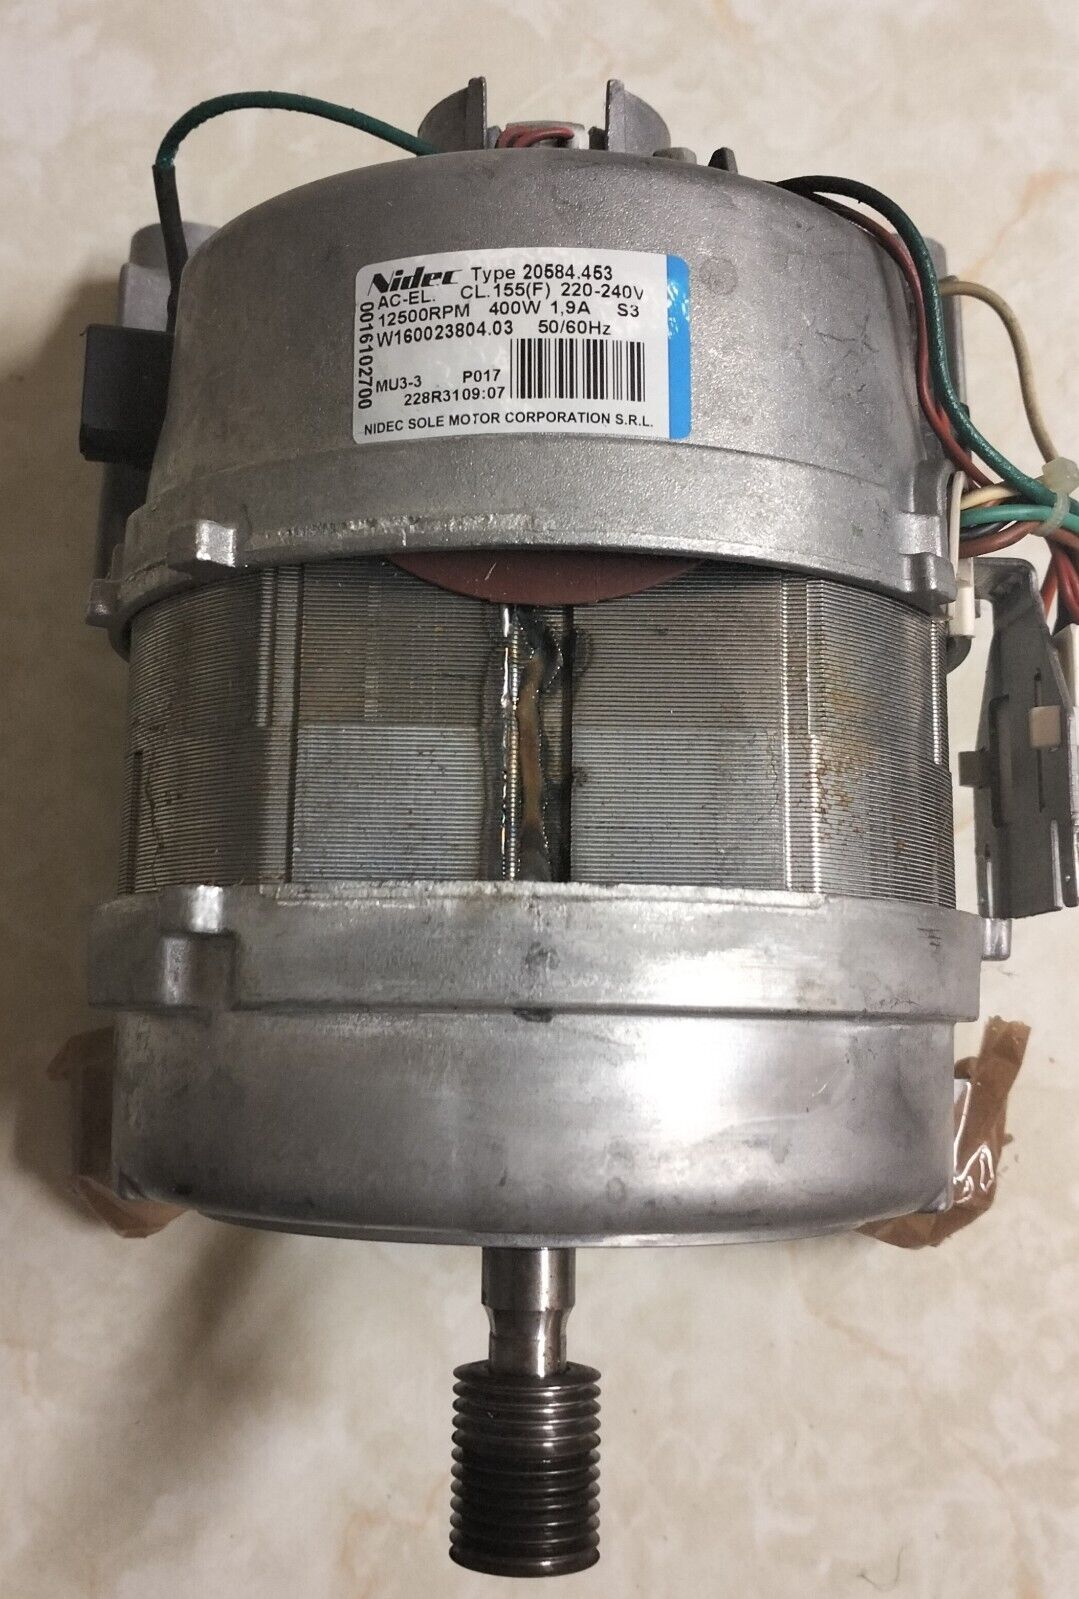 INDESIT Washer Dryer Combined IWDE7145S Electric Motor Nidec Type 20584.453